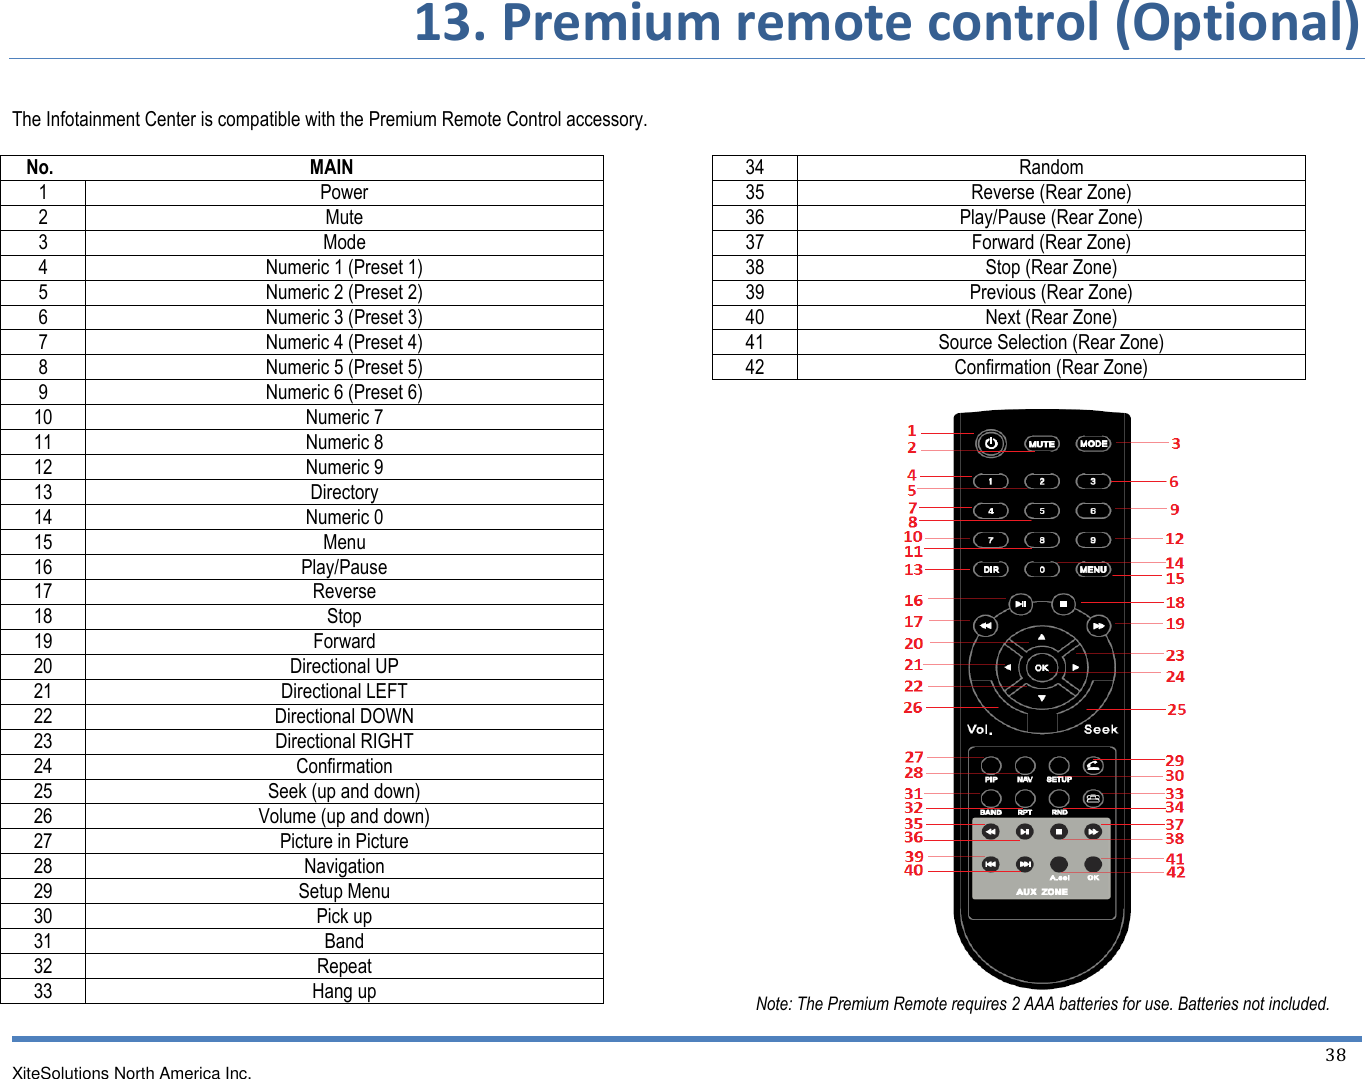       13. Premium remote control (Optional) XiteSolutions North America Inc.    38   The Infotainment Center is compatible with the Premium Remote Control accessory.     No.                                                      MAIN 1 Power 2 Mute 3 Mode 4 Numeric 1 (Preset 1) 5 Numeric 2 (Preset 2) 6 Numeric 3 (Preset 3) 7 Numeric 4 (Preset 4) 8 Numeric 5 (Preset 5) 9 Numeric 6 (Preset 6) 10 Numeric 7 11 Numeric 8 12 Numeric 9 13 Directory 14 Numeric 0 15 Menu 16 Play/Pause 17 Reverse 18 Stop 19 Forward 20 Directional UP 21 Directional LEFT 22 Directional DOWN 23 Directional RIGHT 24 Confirmation 25 Seek (up and down) 26 Volume (up and down) 27 Picture in Picture 28 Navigation 29 Setup Menu 30 Pick up 31 Band 32 Repeat 33 Hang up     34 Random 35 Reverse (Rear Zone) 36 Play/Pause (Rear Zone) 37 Forward (Rear Zone) 38 Stop (Rear Zone) 39 Previous (Rear Zone) 40 Next (Rear Zone) 41 Source Selection (Rear Zone) 42 Confirmation (Rear Zone)   Note: The Premium Remote requires 2 AAA batteries for use. Batteries not included.